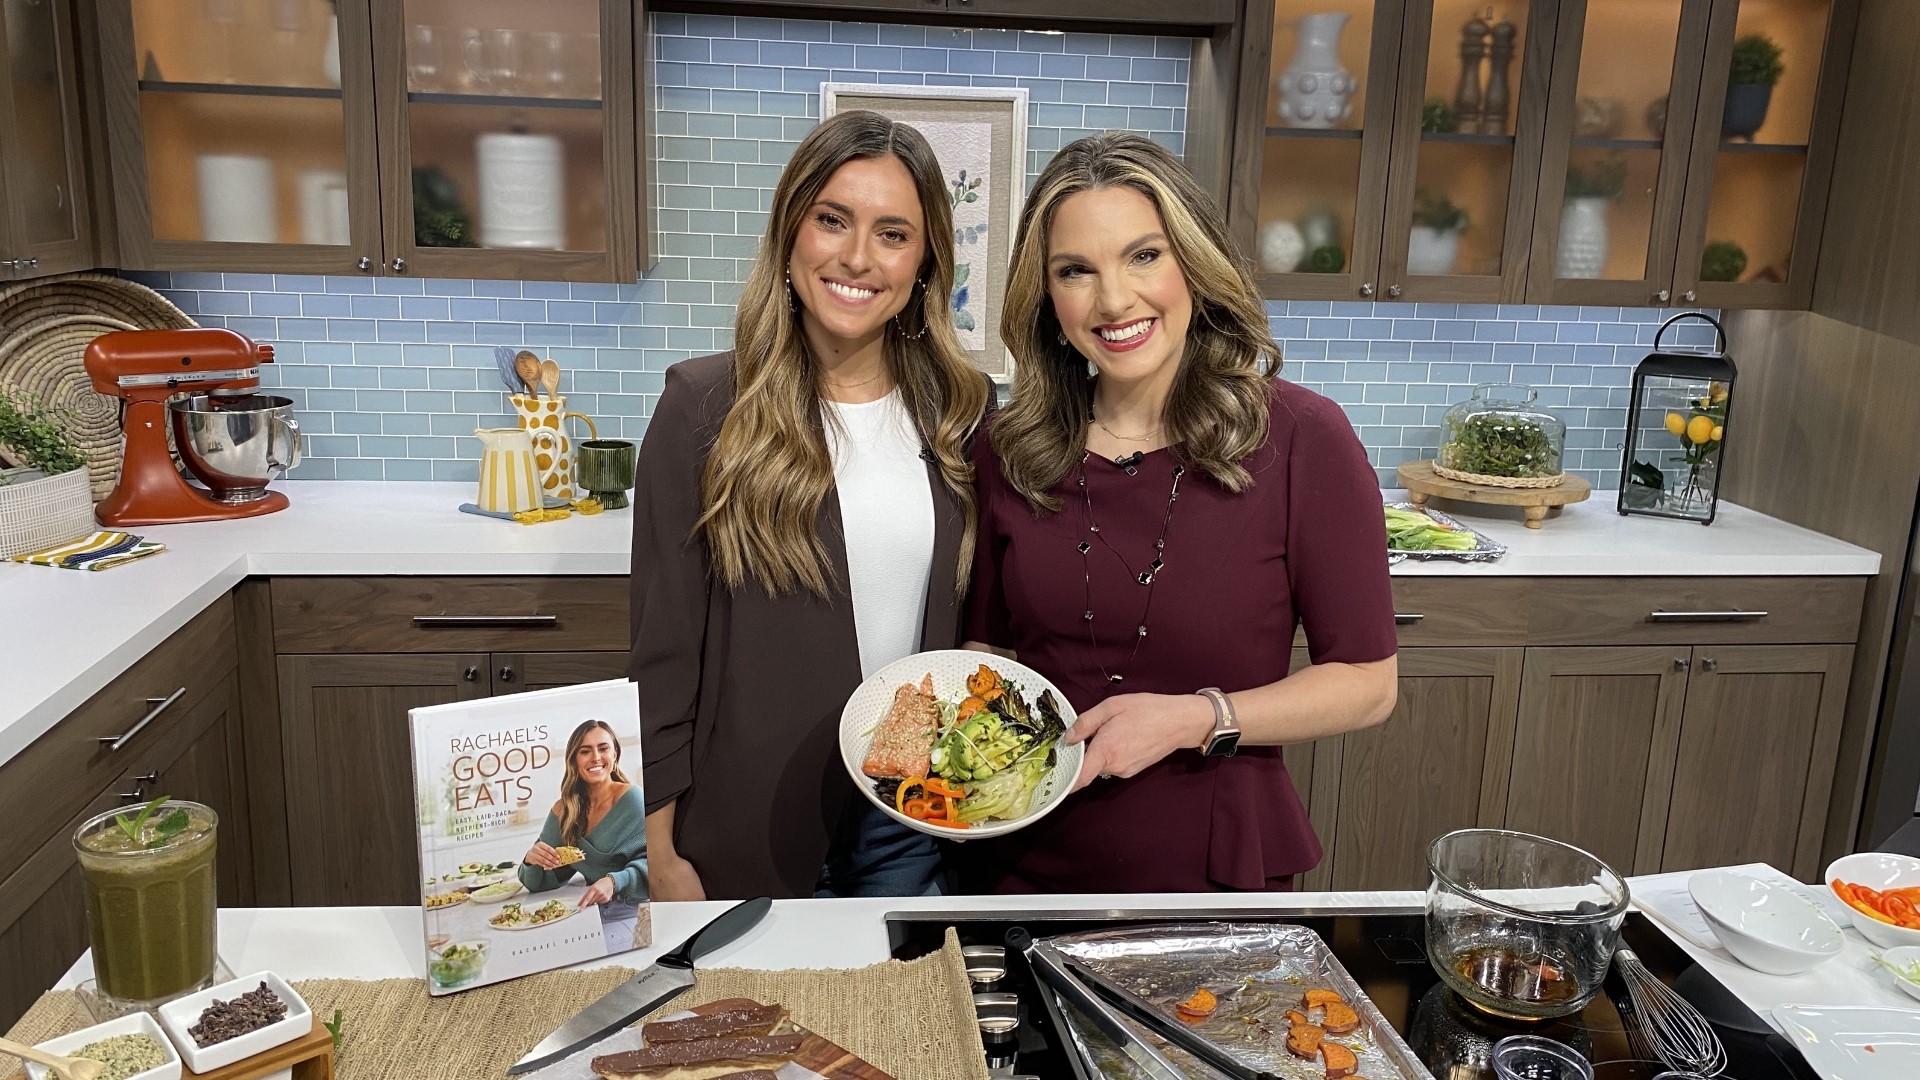 Seattle-based cookbook author Rachael DeVaux shares a recipe from her new book Rachael's Good Eats: Easy, Laid-Back, Nutrient-Rich Recipes.